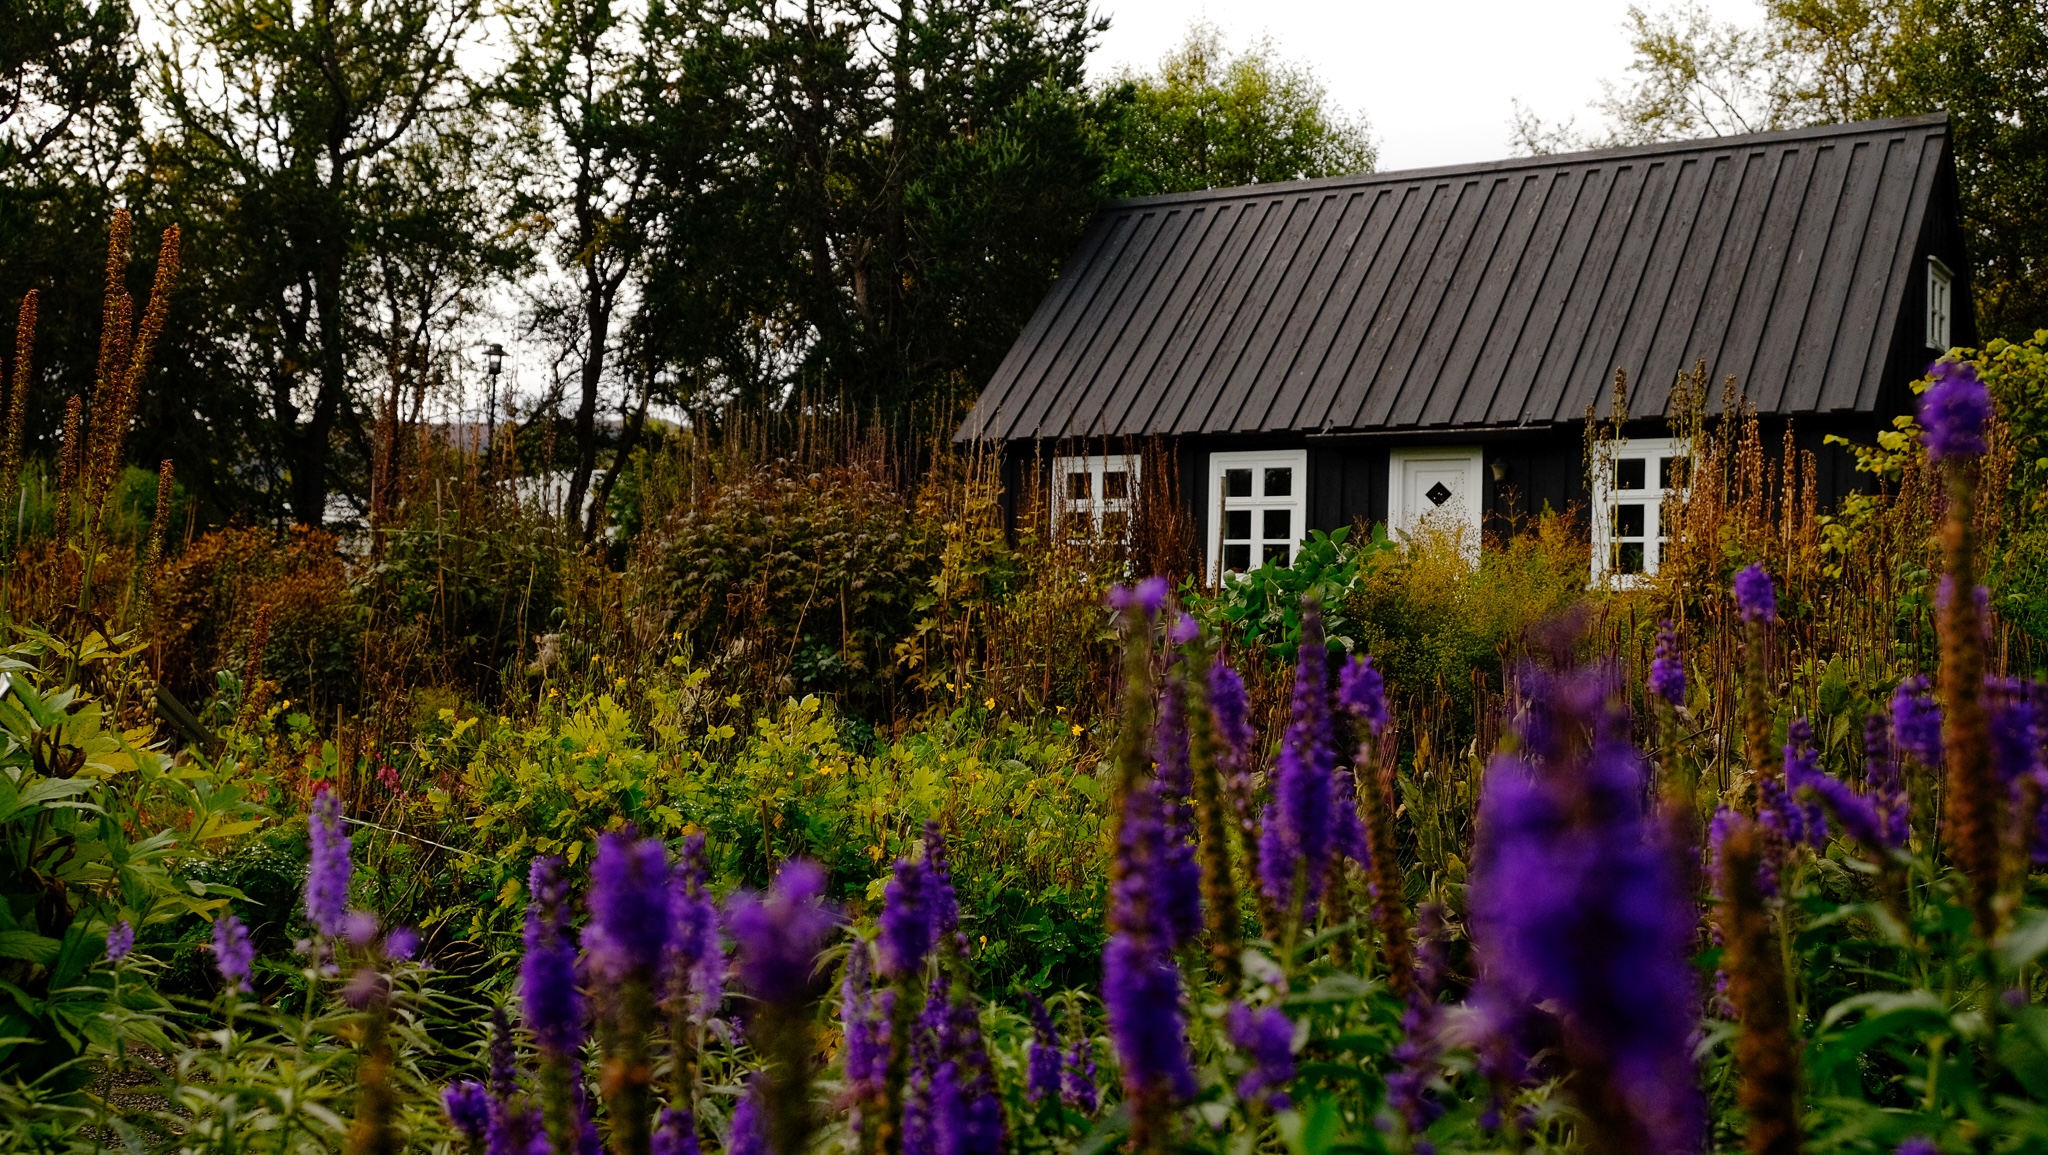 Purple flowers blurred out in the foreground lead to a garden and a black house with white window frames and door with a diamond shape peep-hole